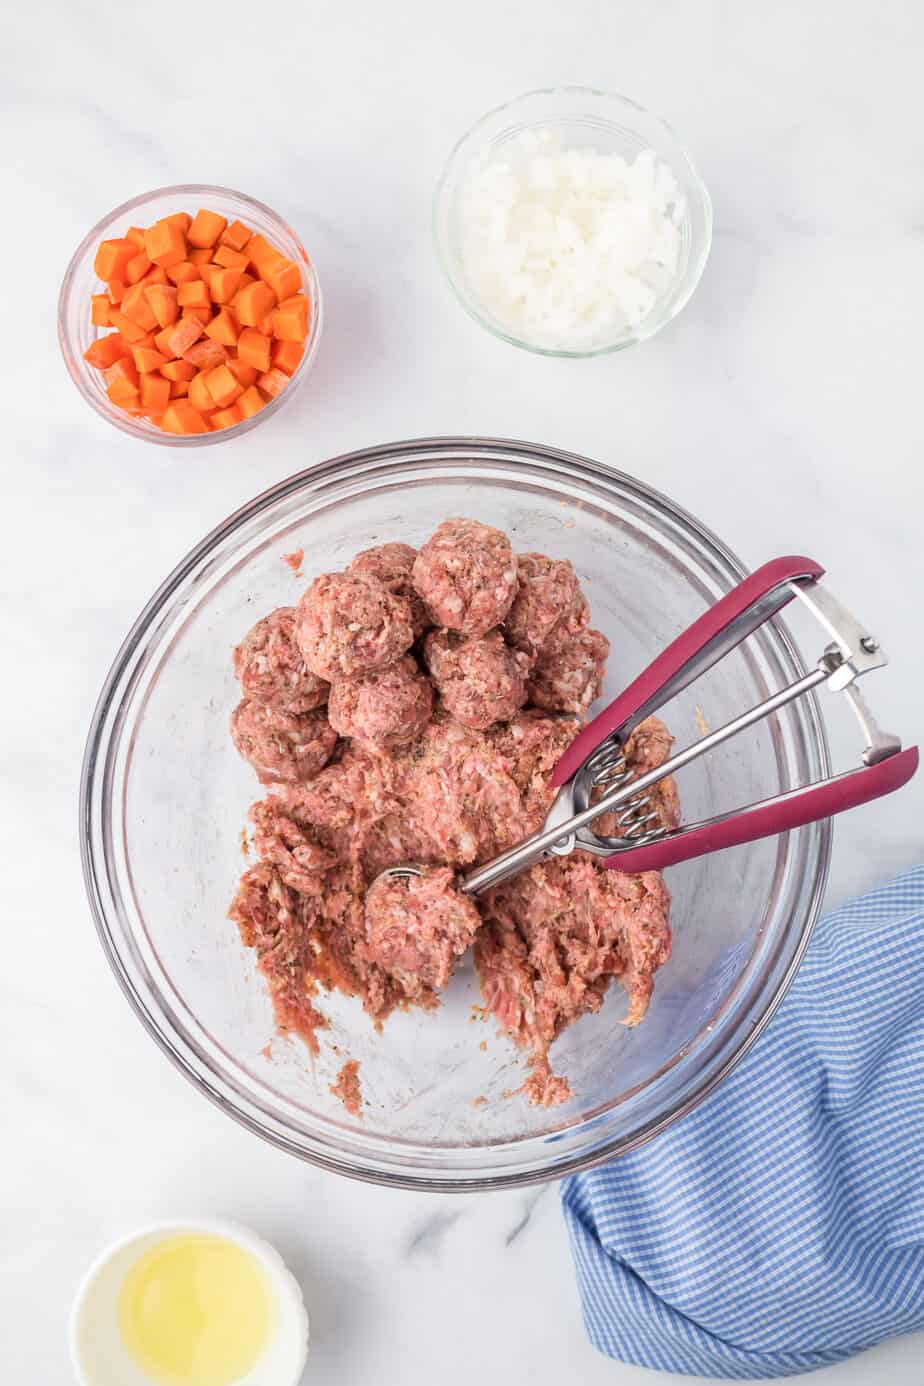 Scooping meatballs from a large glass bowl of mix on a counter from overhead with more ingredients nearby.